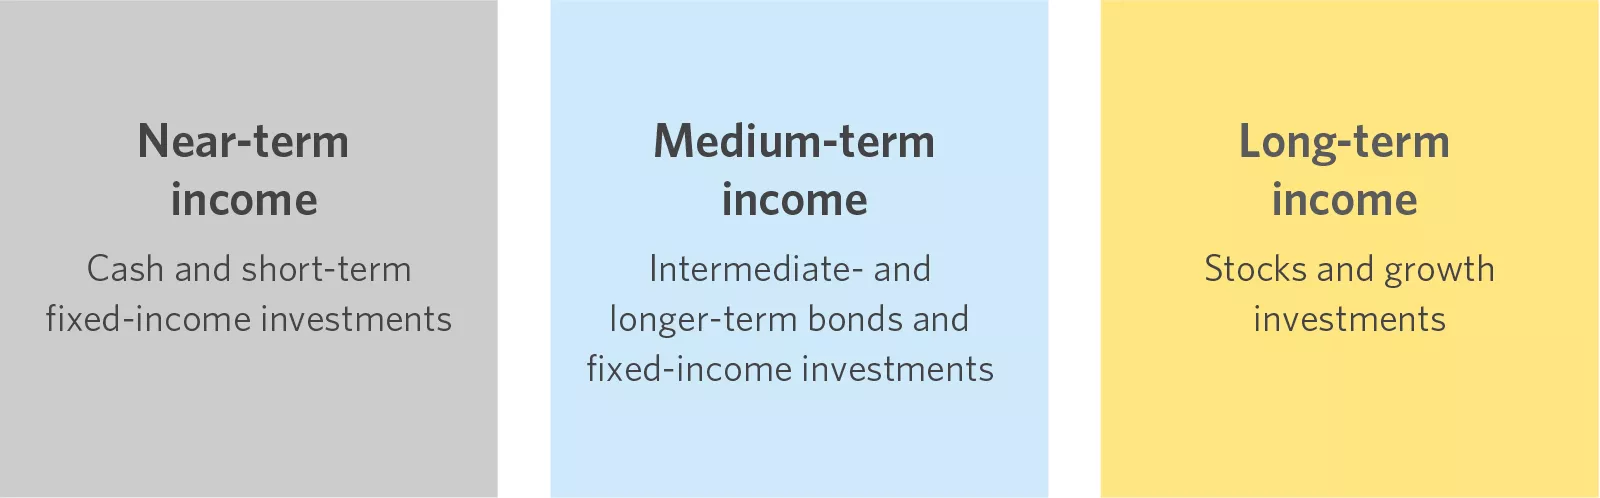  Definitions of near-term, medium-term and long-term income
